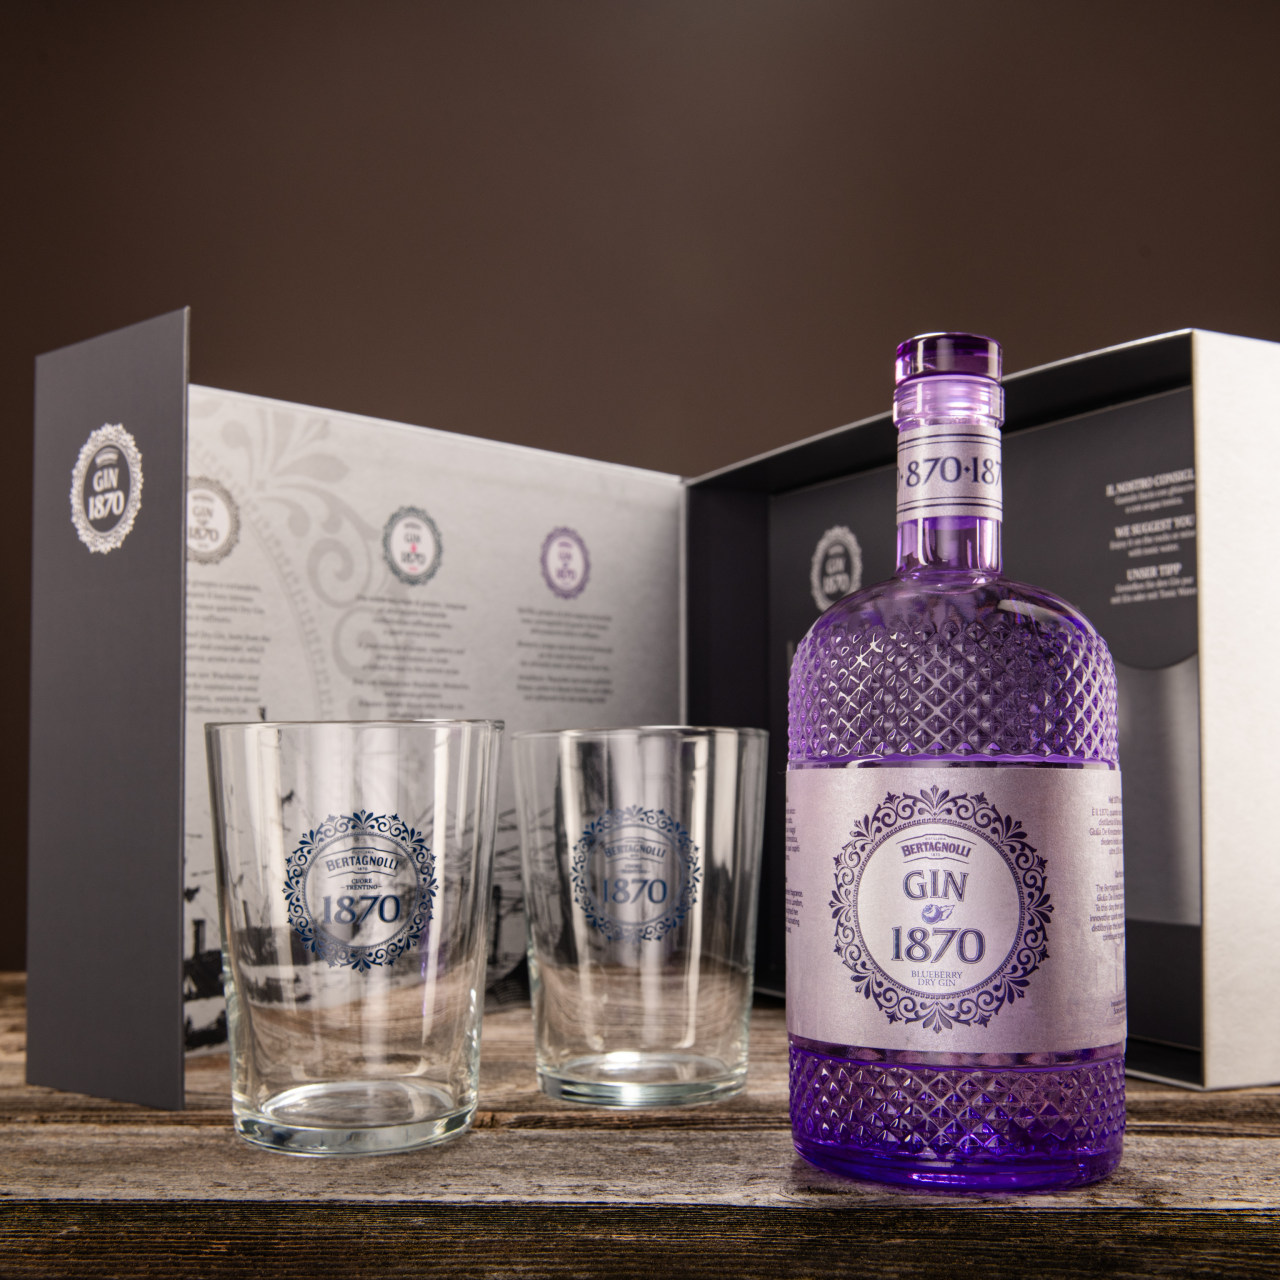 Gin1870 Blueberry Dry Gin Box with 2 Glasses